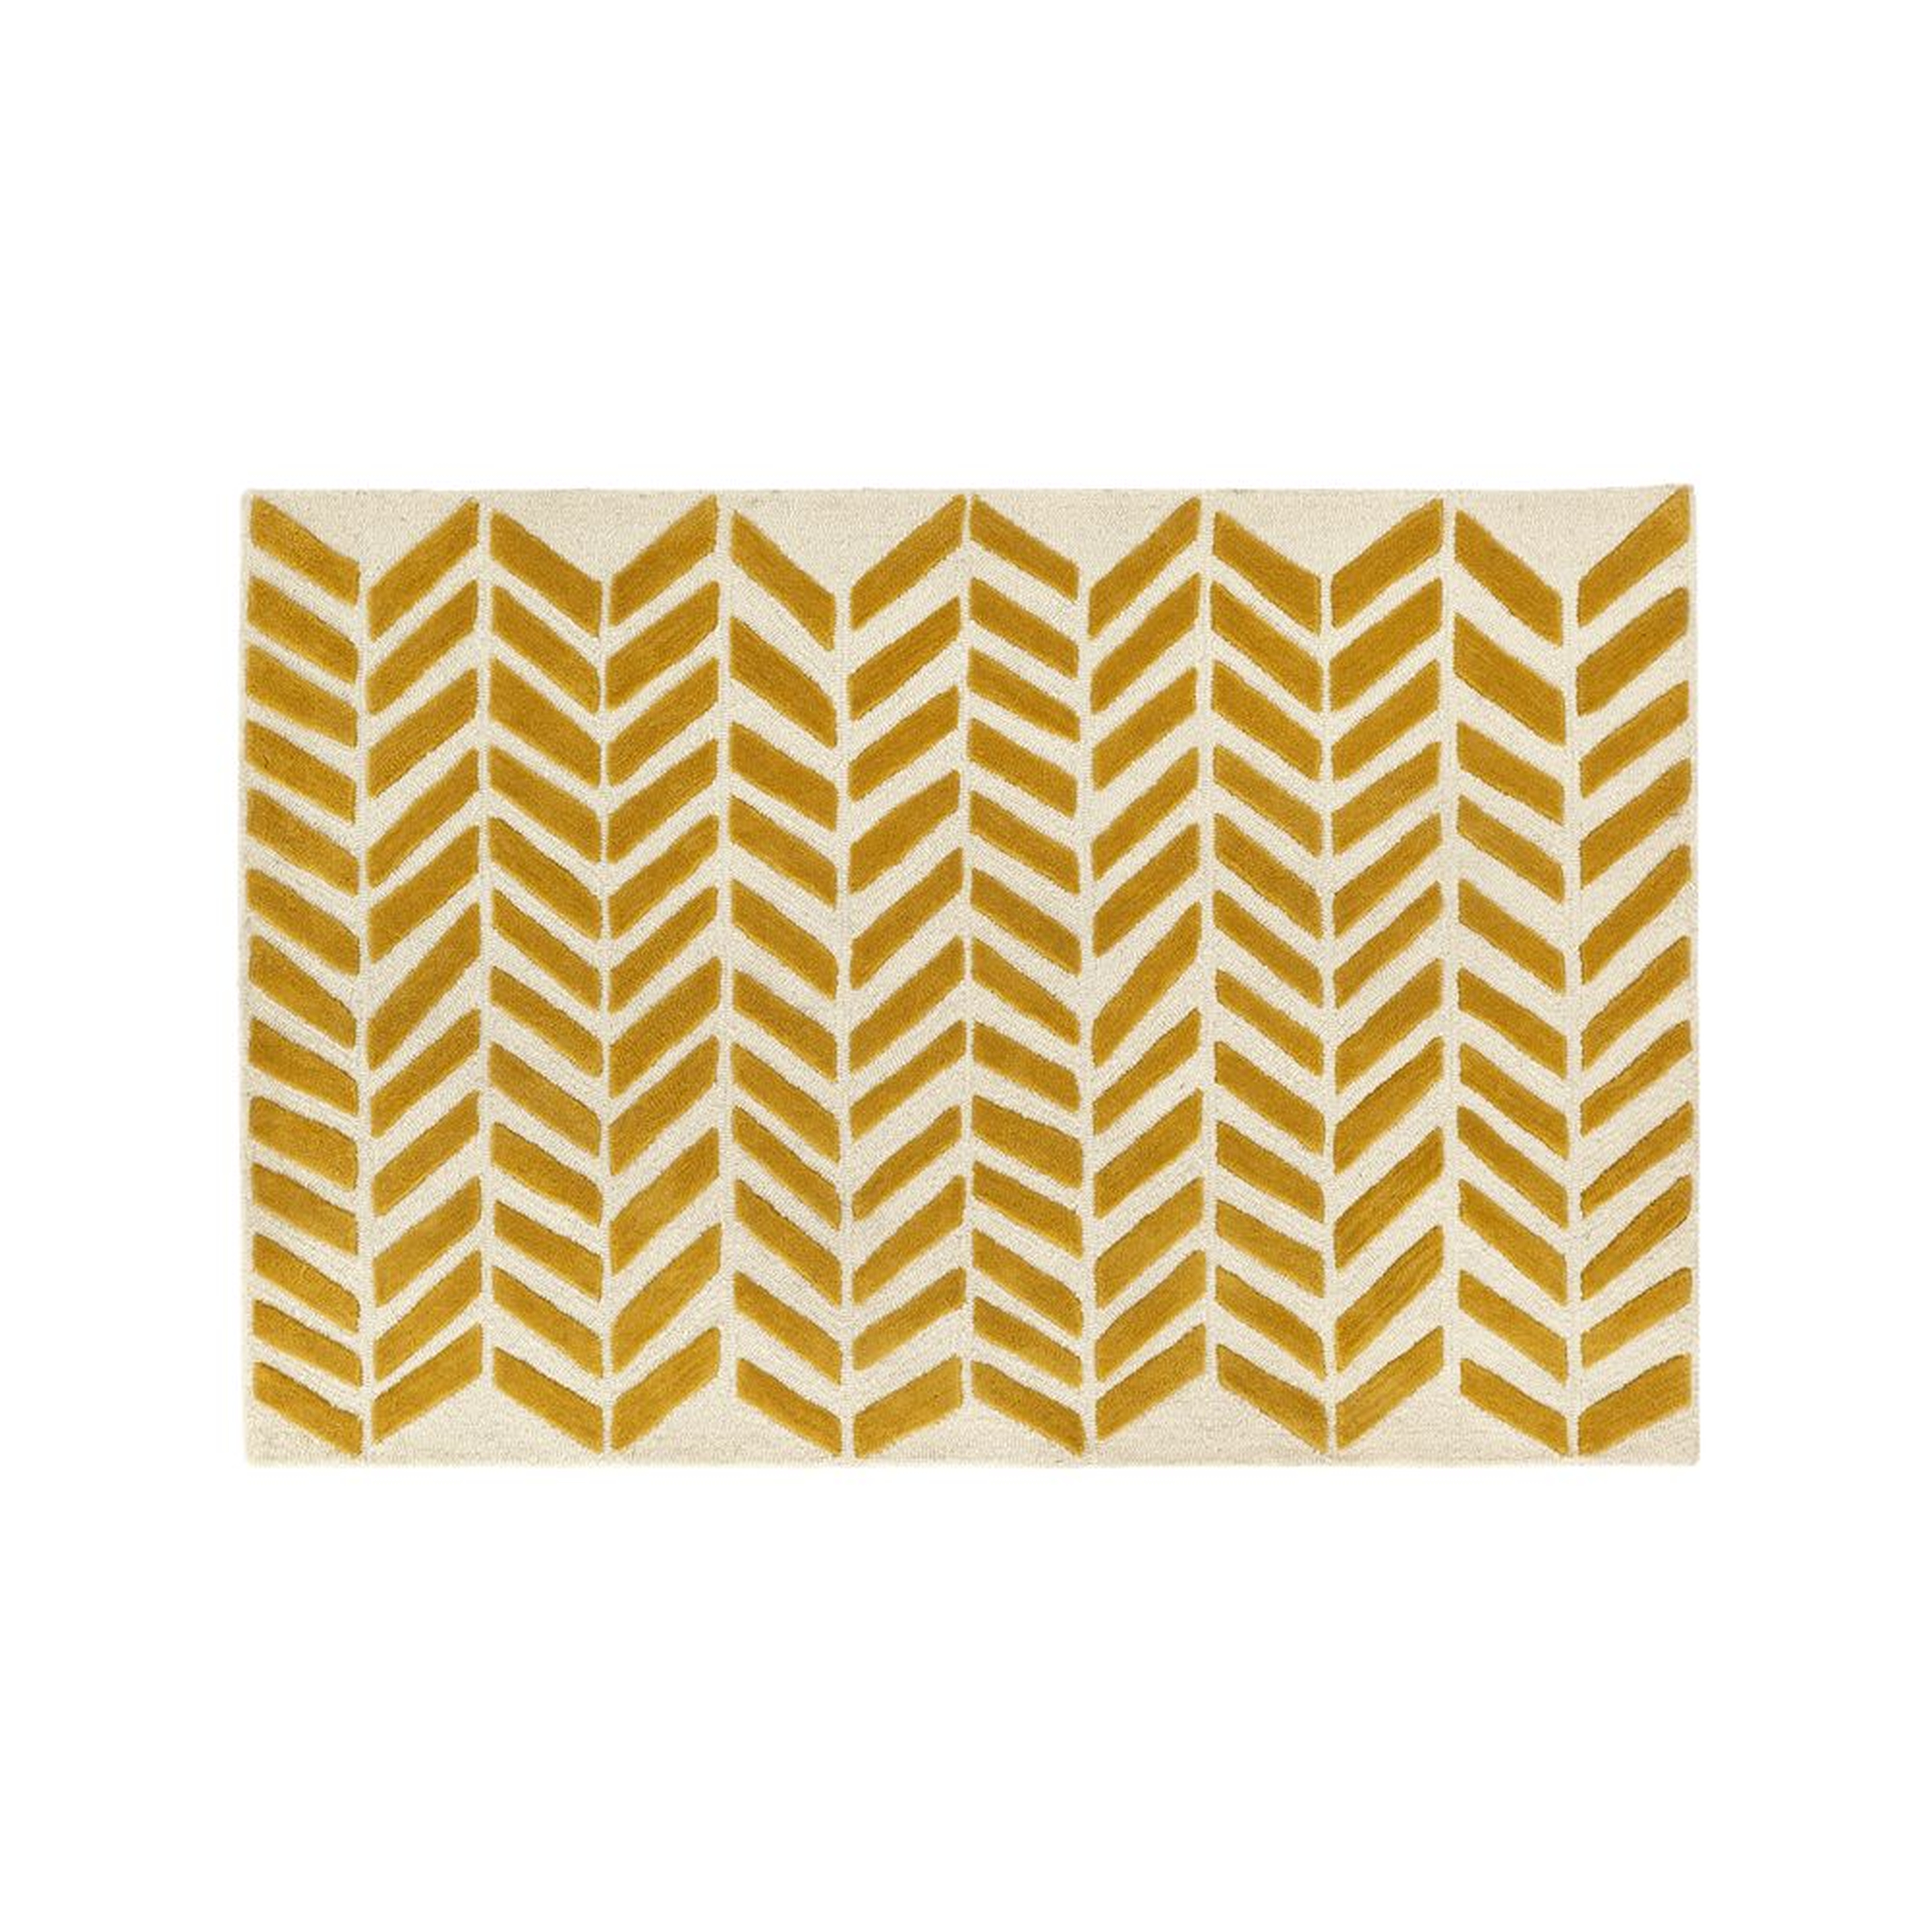 Hand-Tufted Yellow Chevron Kids Rug 8x10 - Crate and Barrel